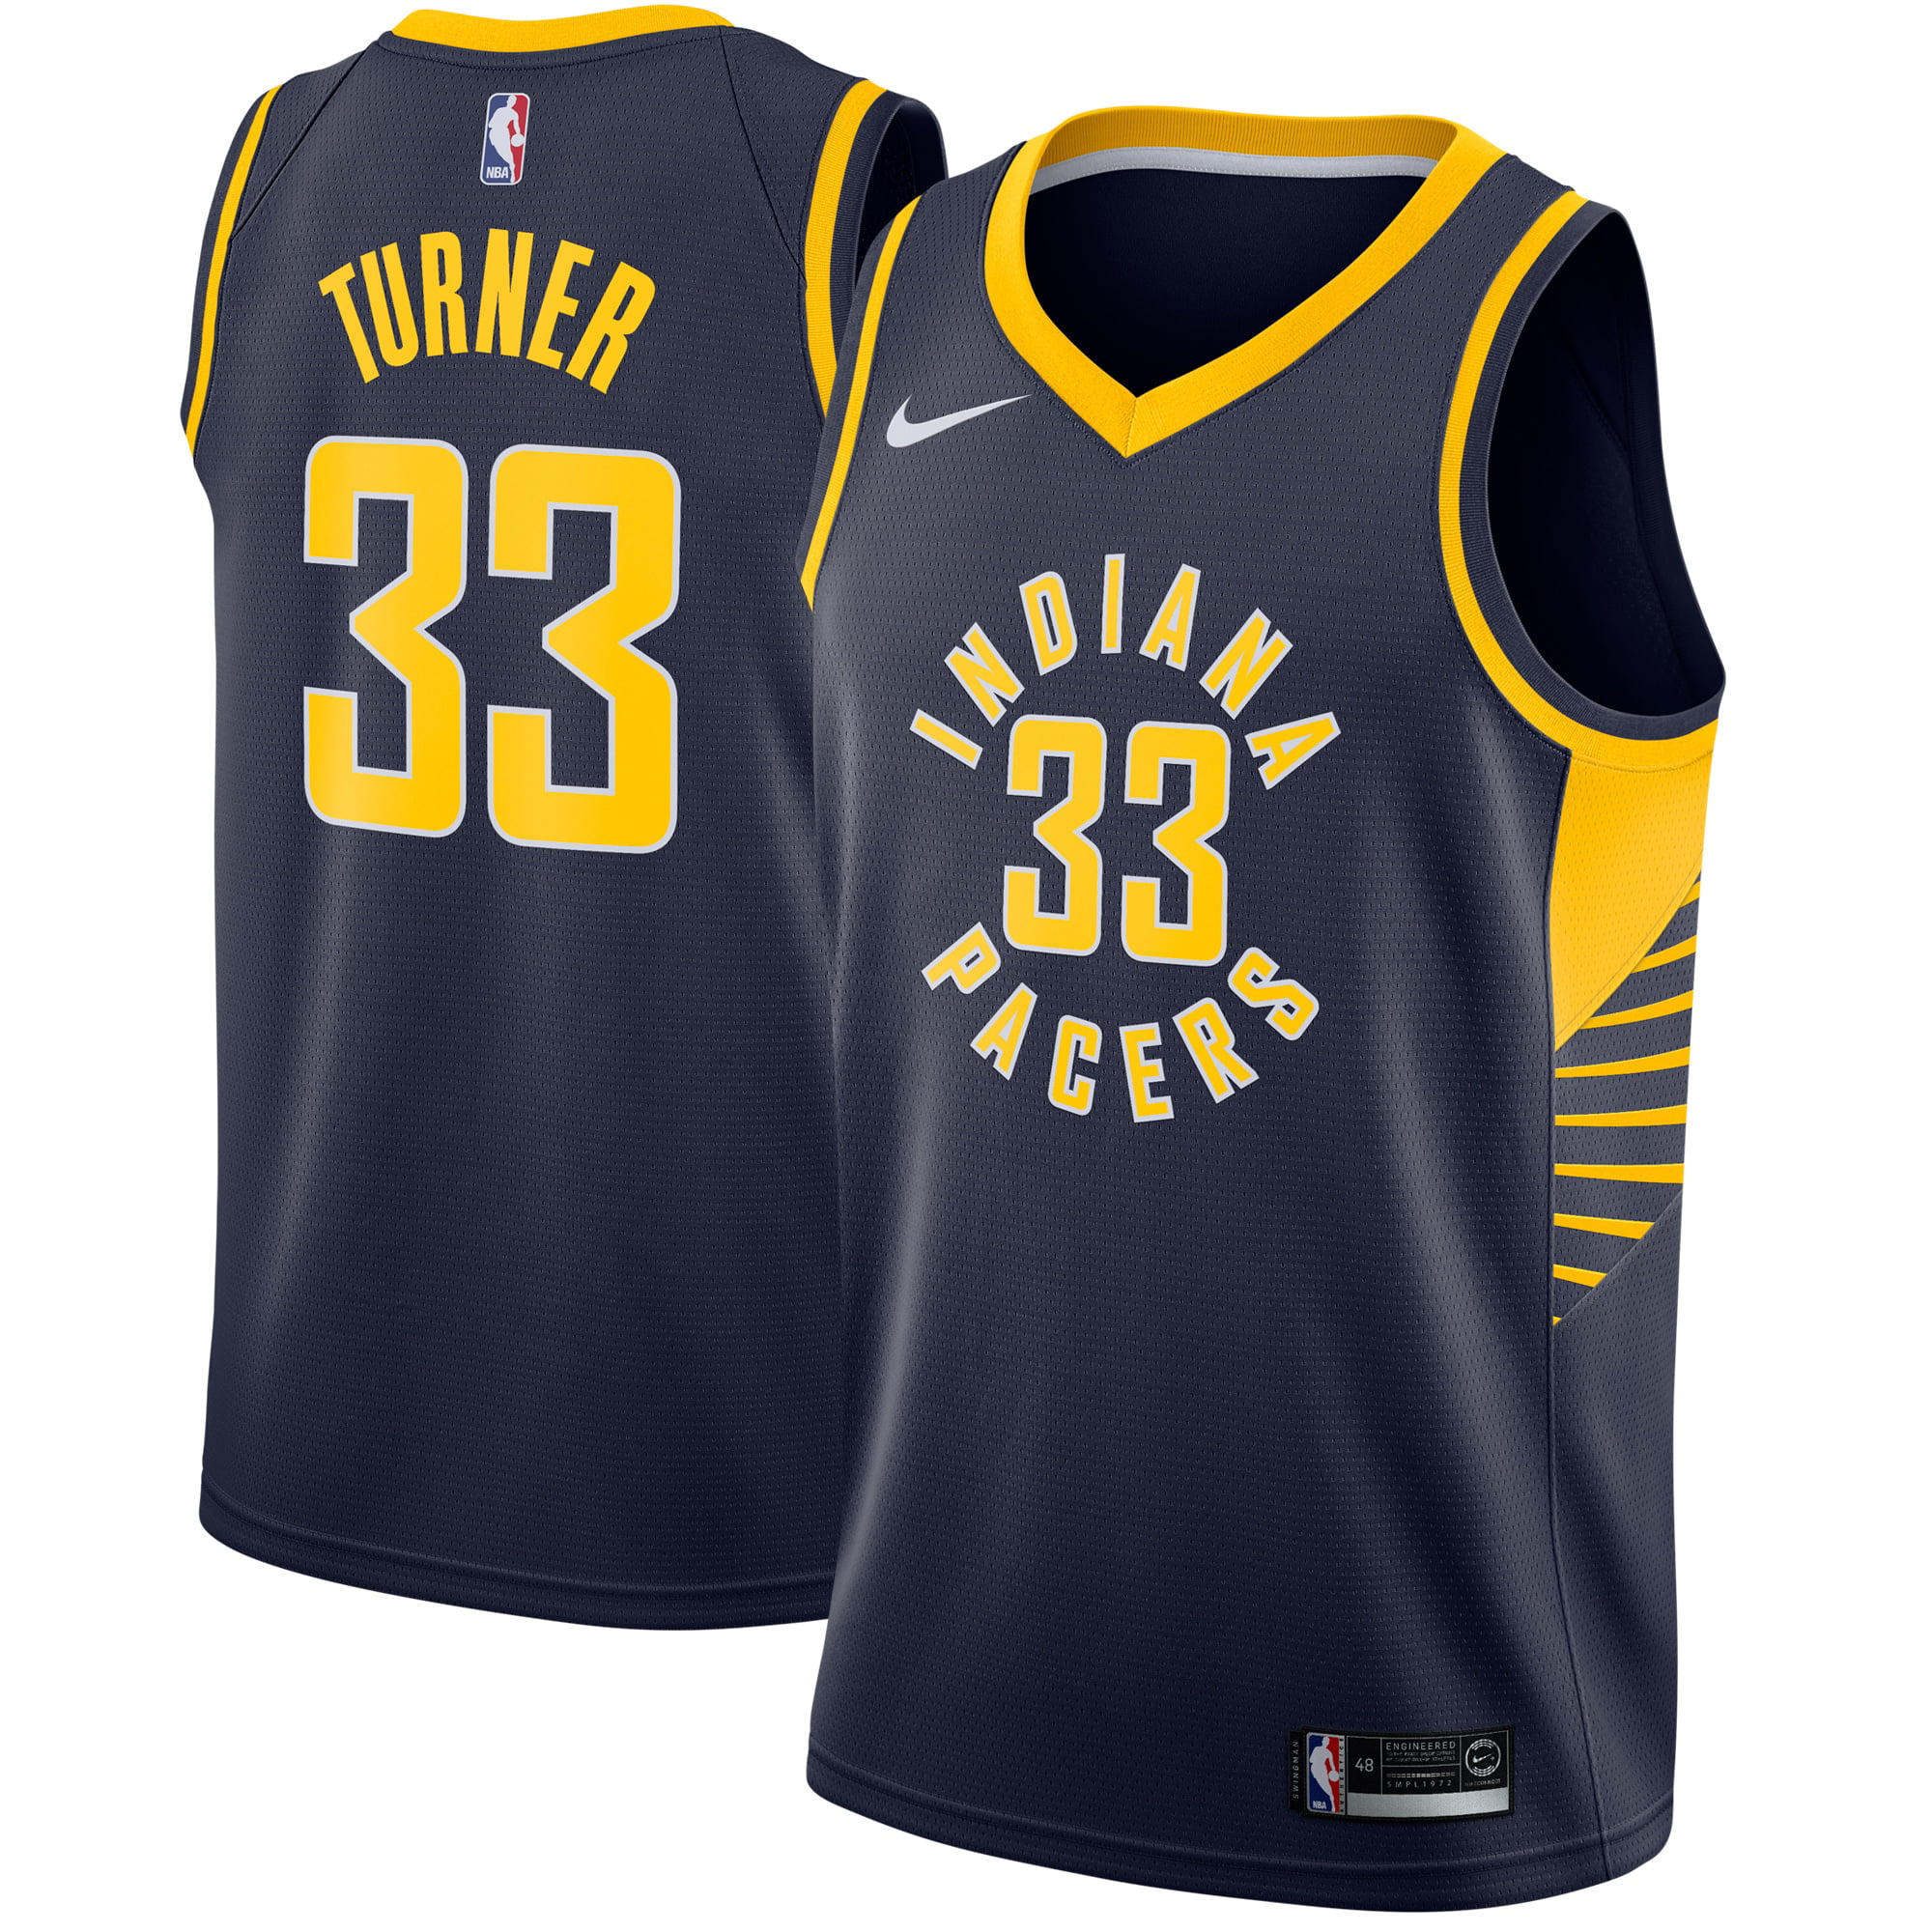 pacers jersey